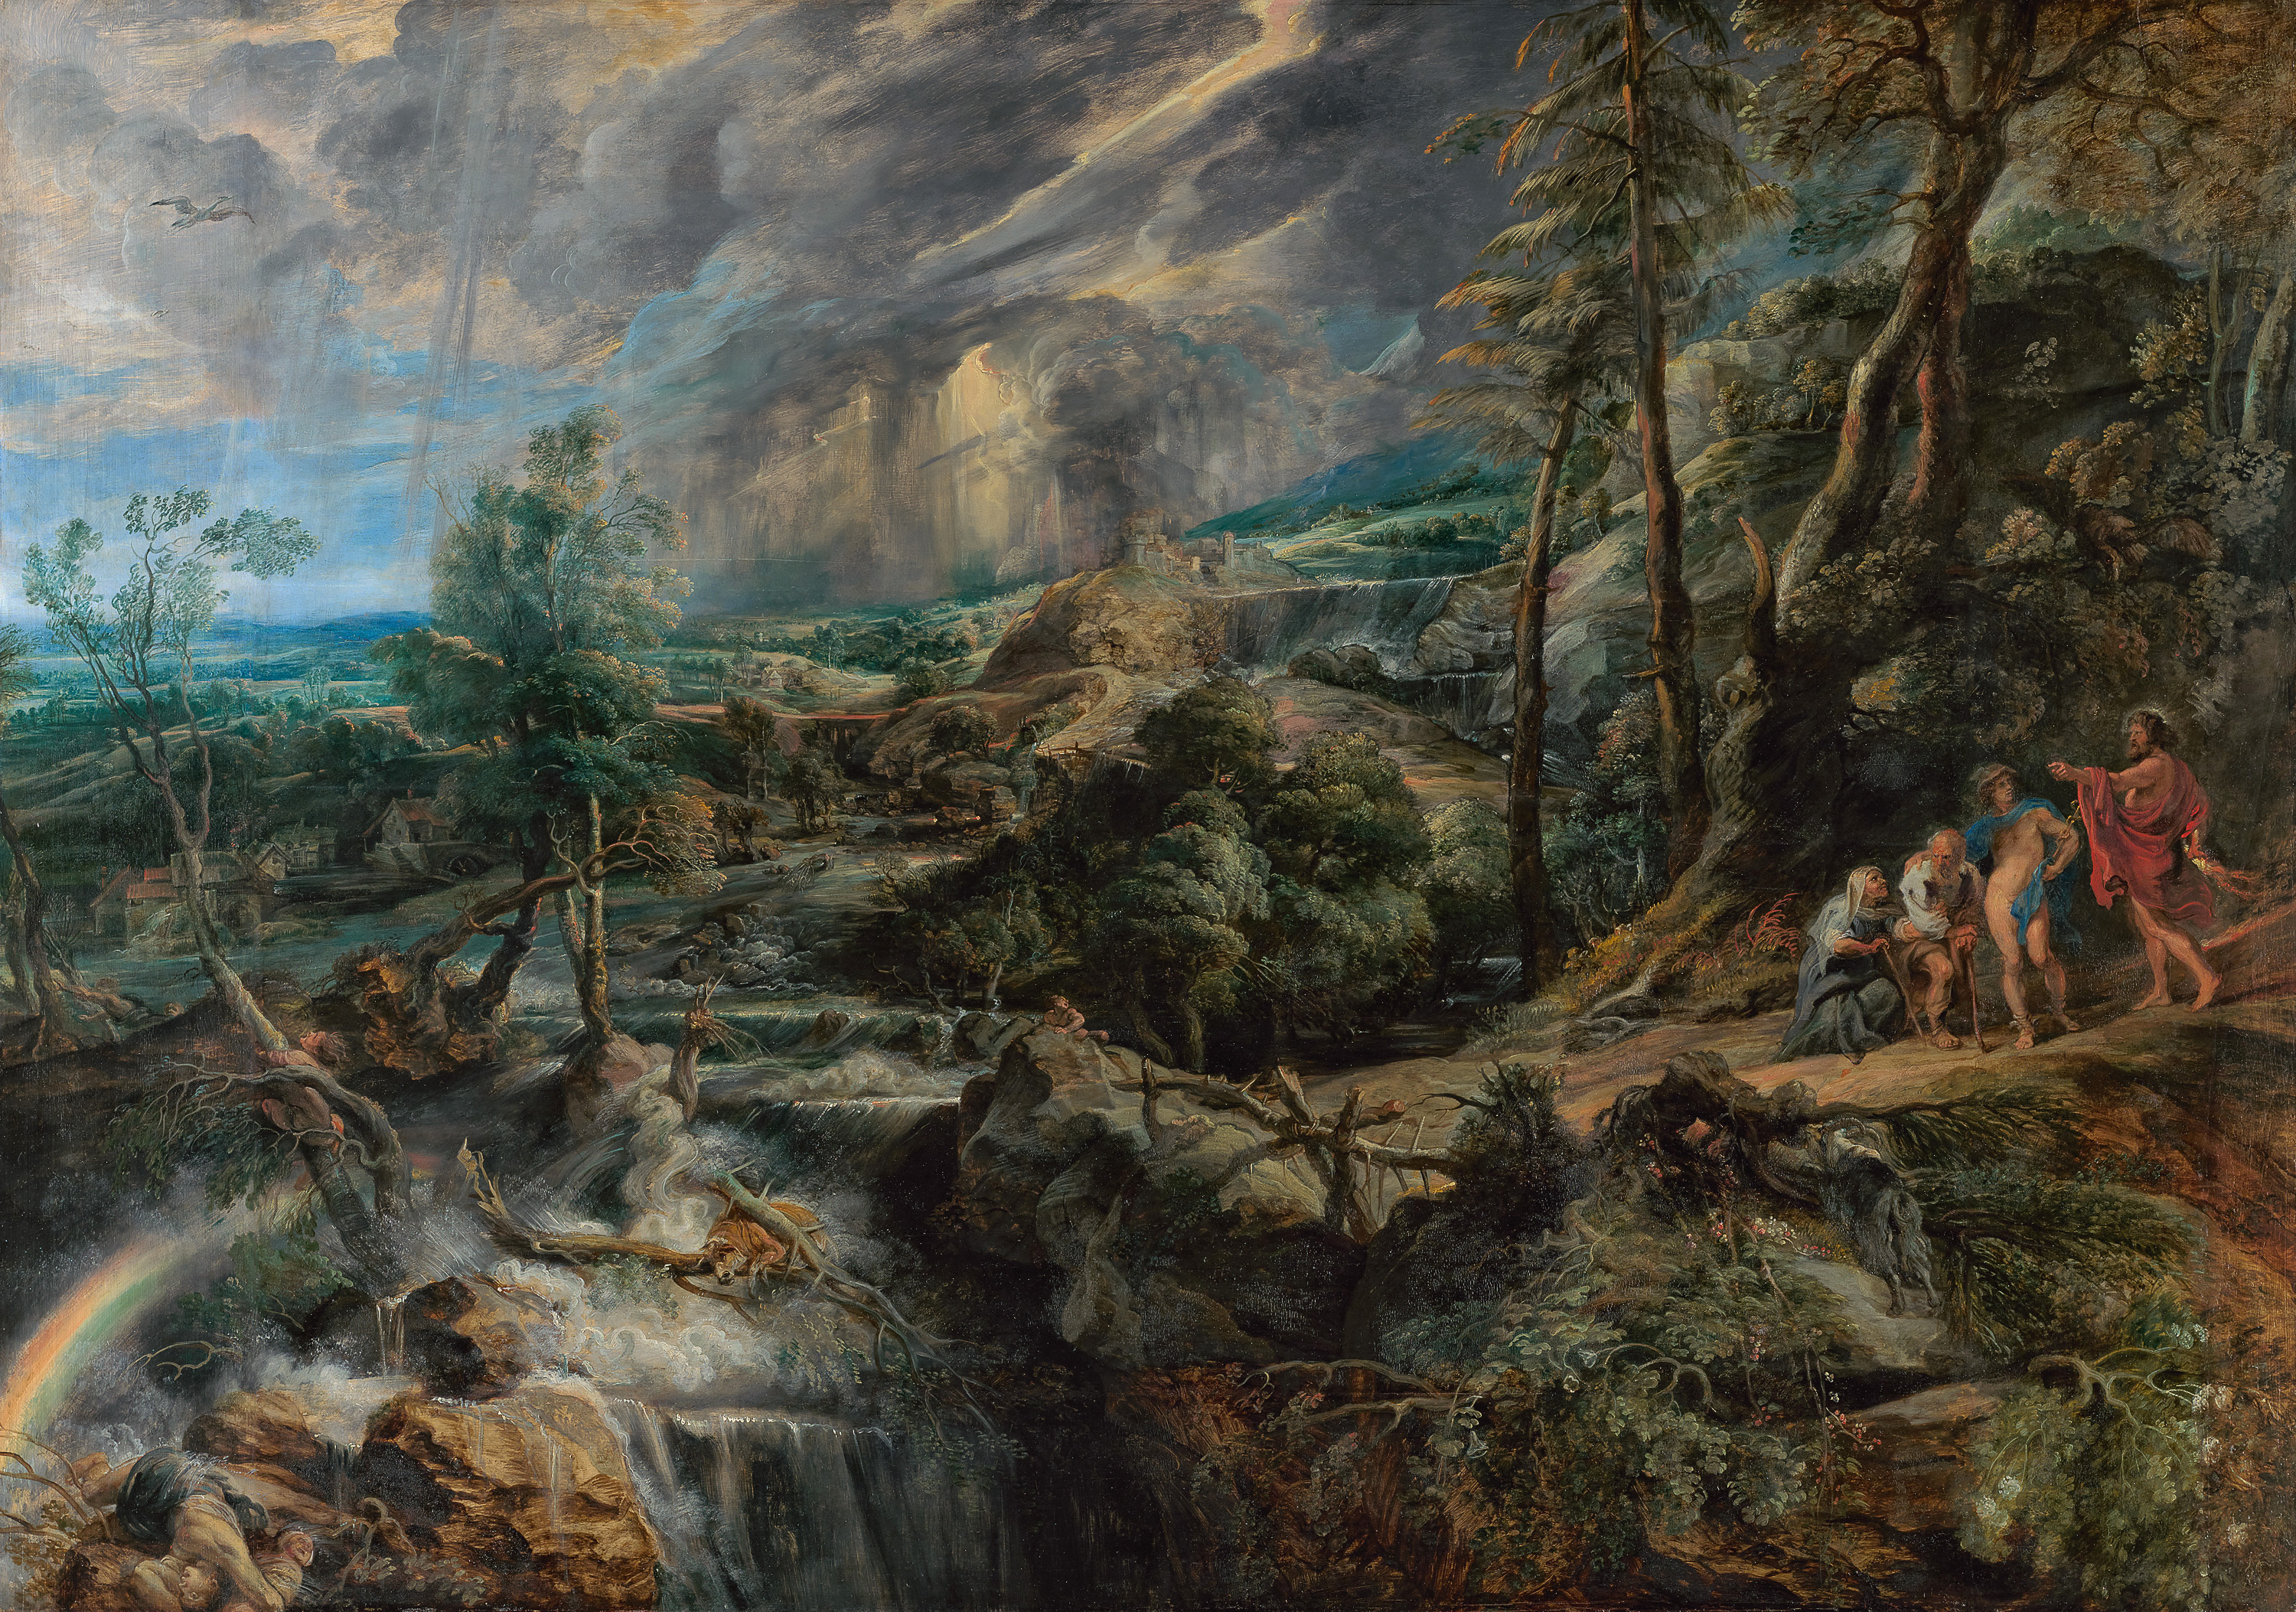 Landscape with Philemon and Baucis by Peter Paul Rubens - 1620/1625 - 208.5 x 146 cm Kunsthistorisches Museum